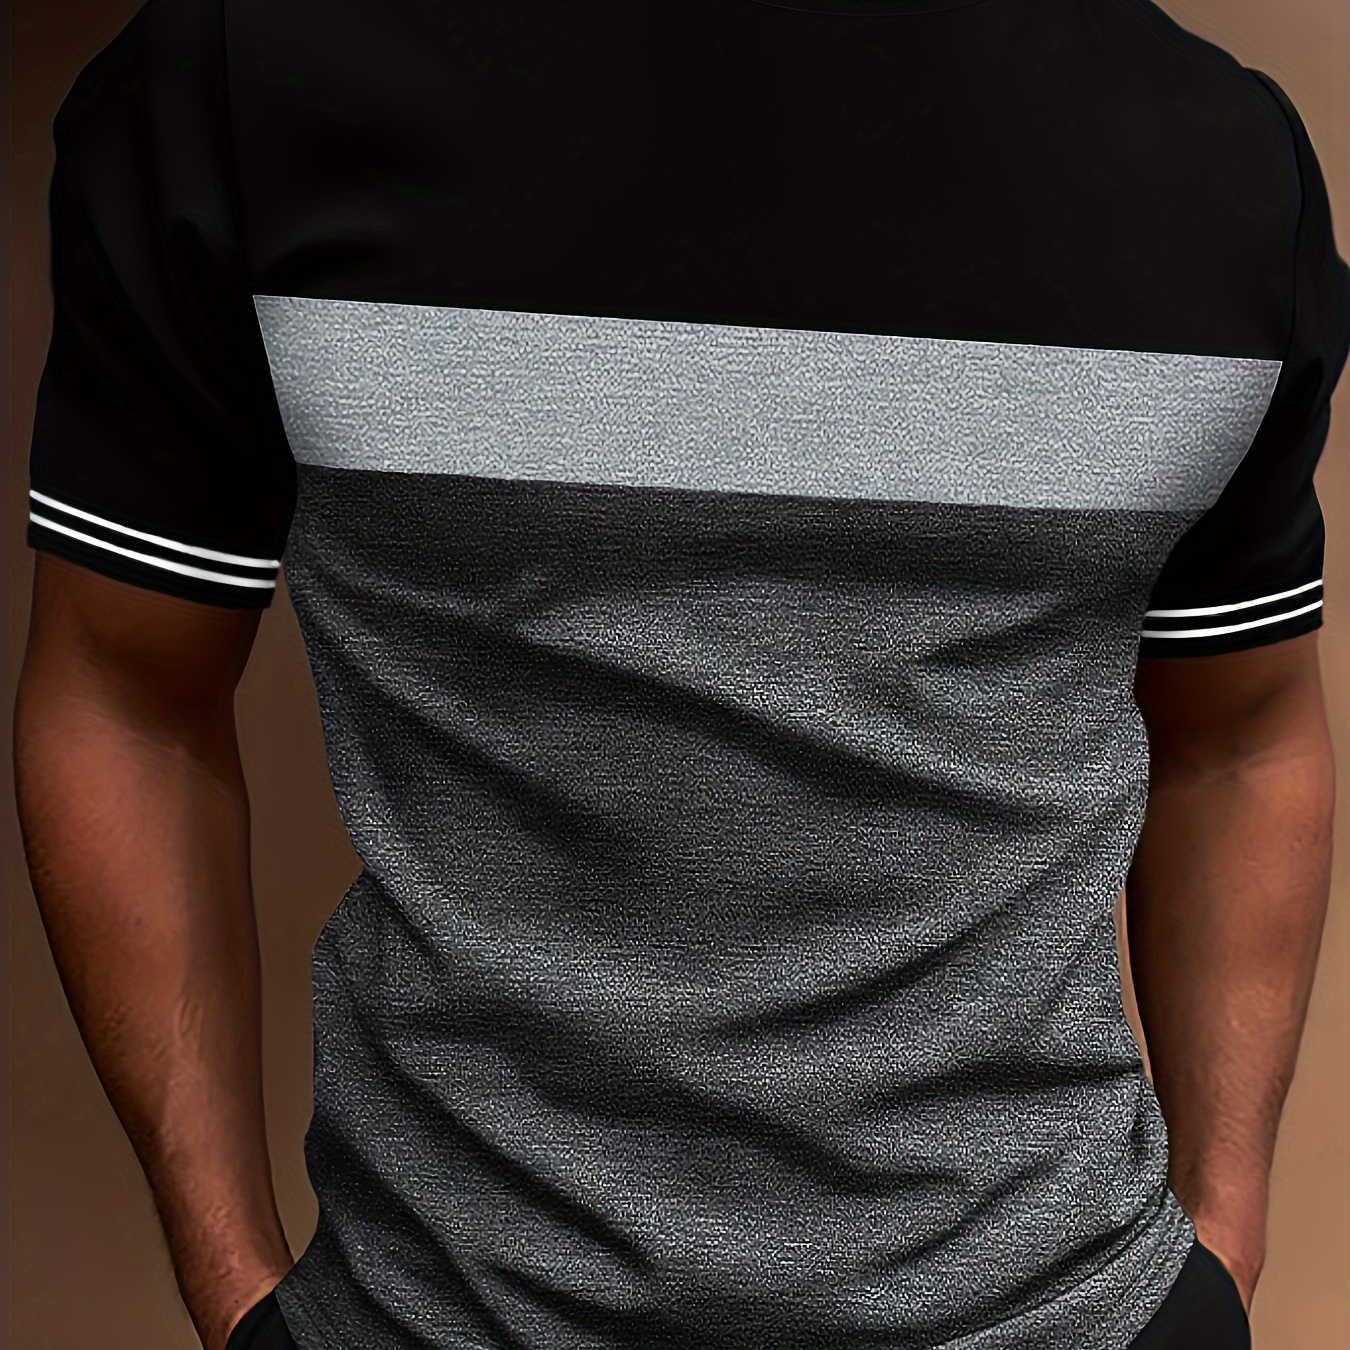 

Men's Stylish Stripe Pattern Shirt, Casual Breathable Crew Neck Short Sleeve Tee Top For City Walk Street Hanging Outdoor Activities